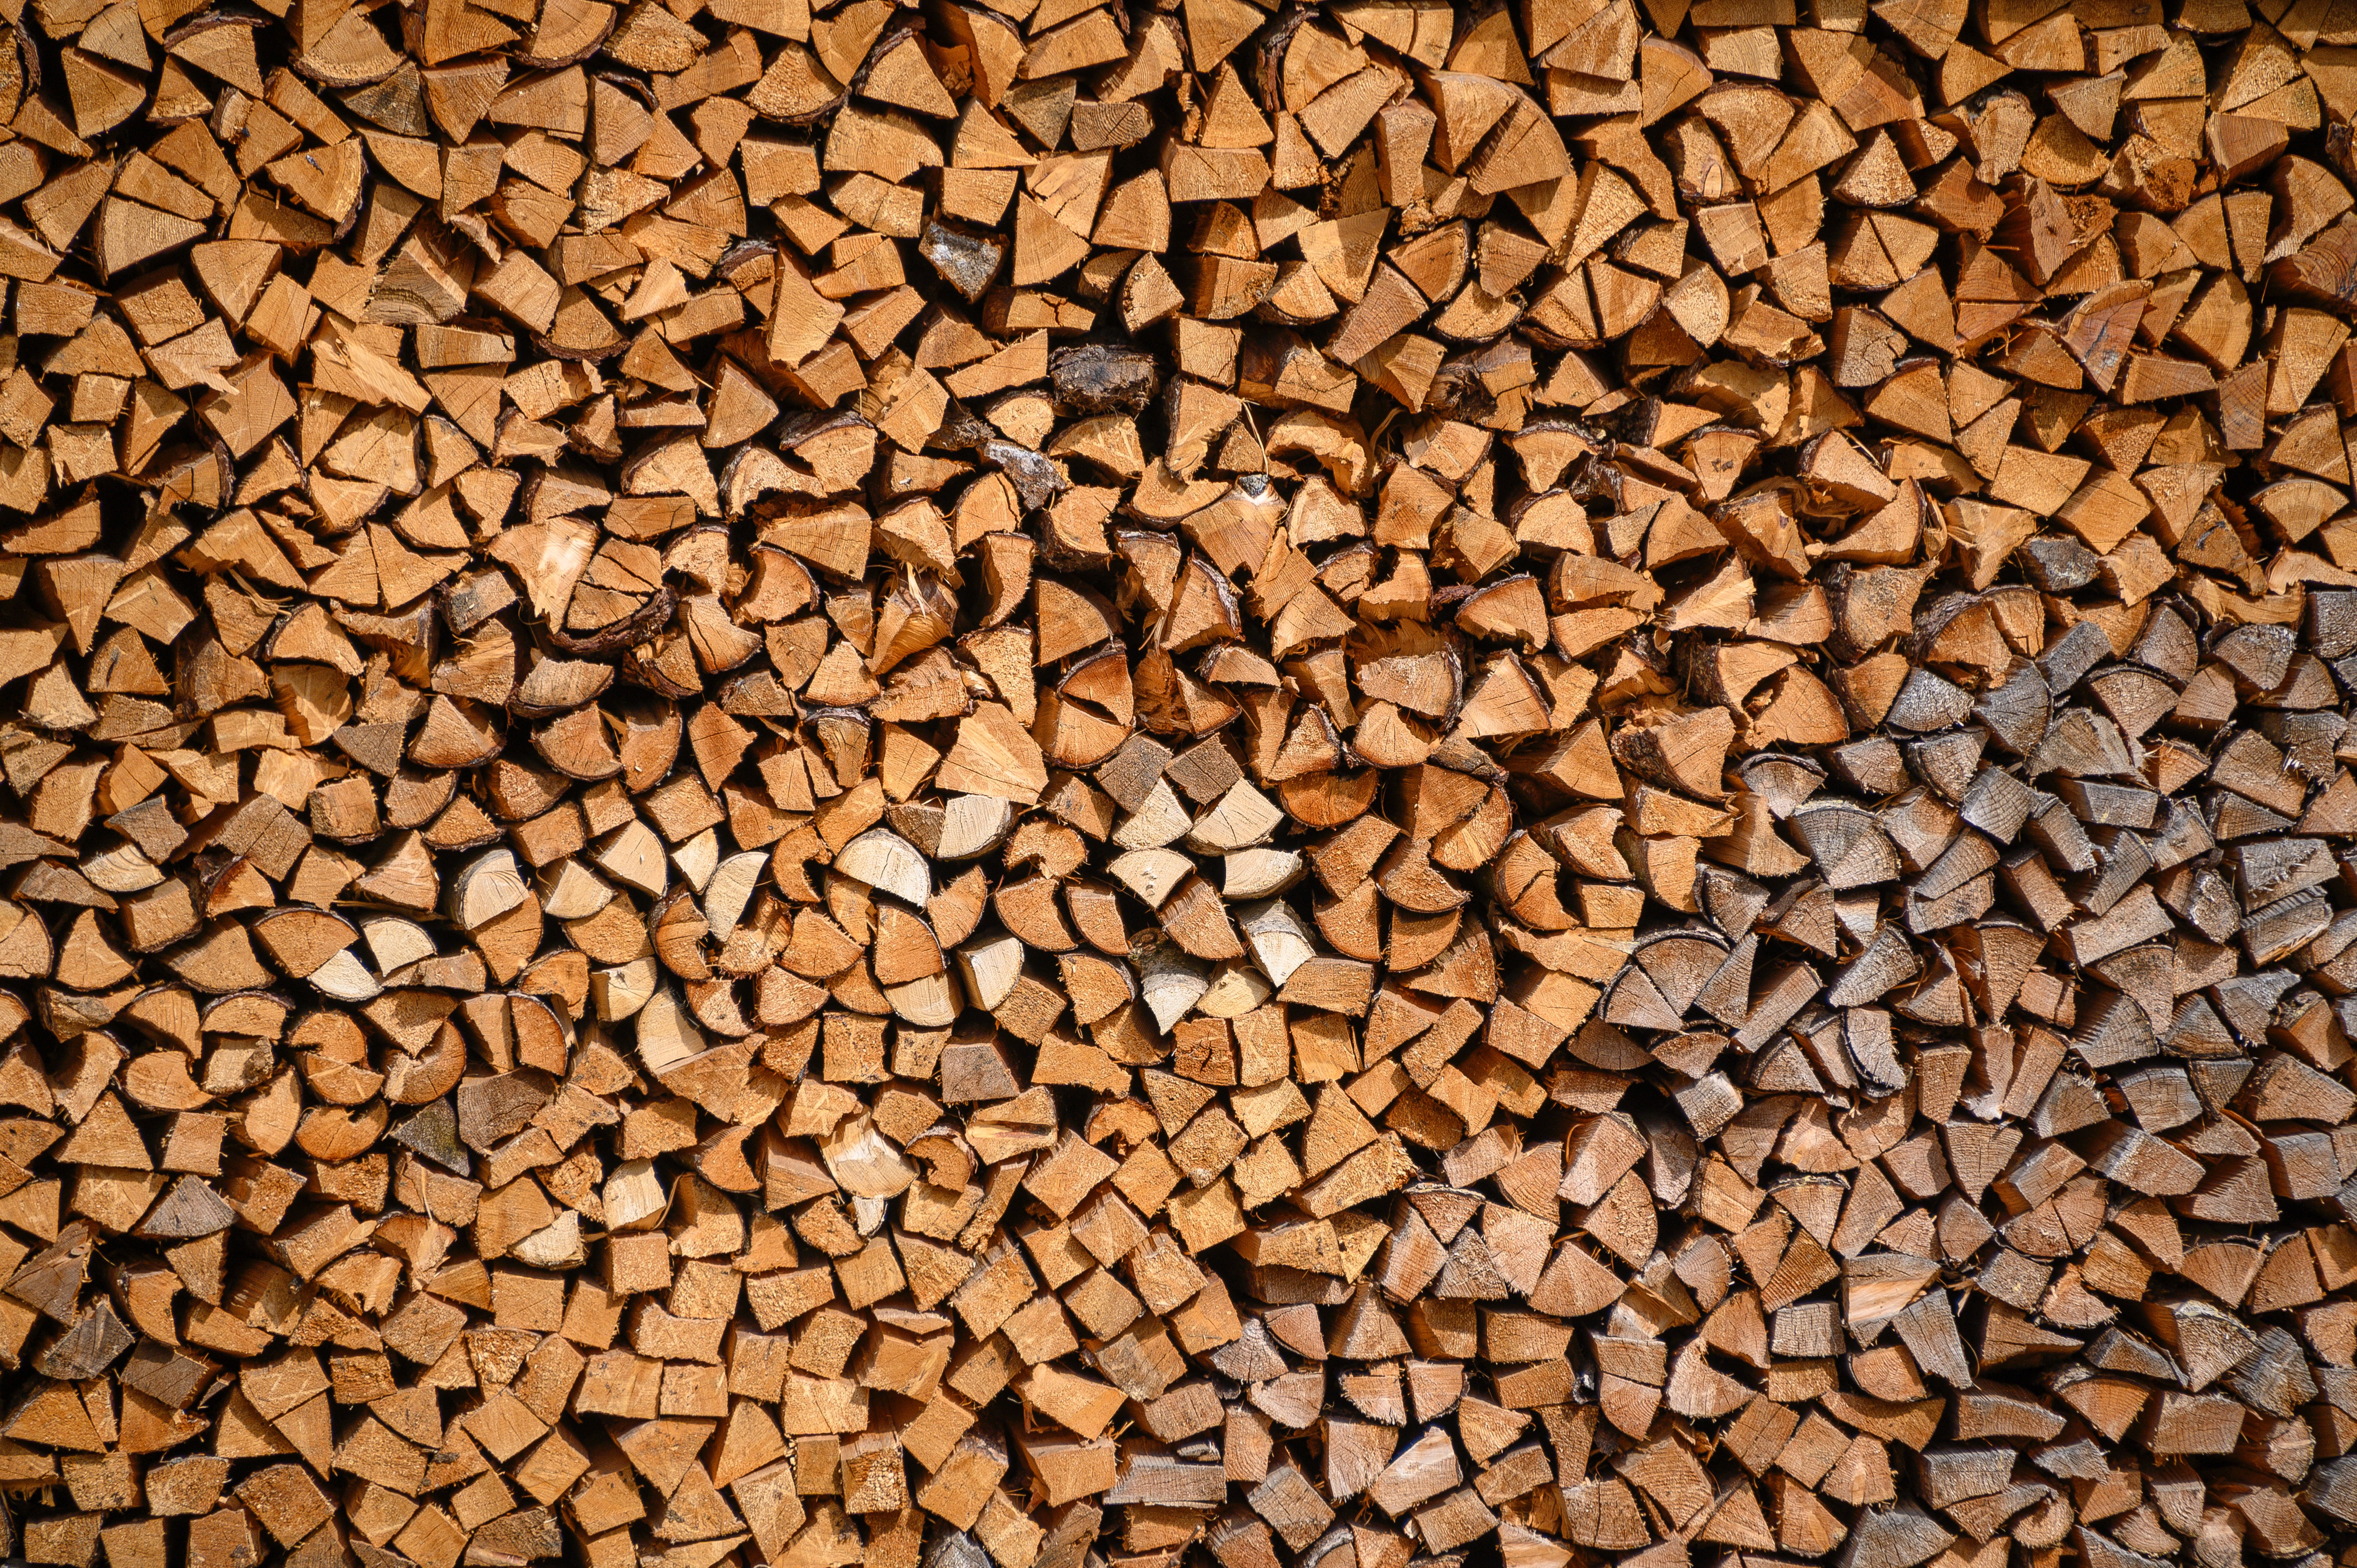 Production of wood for energy in Tõrva